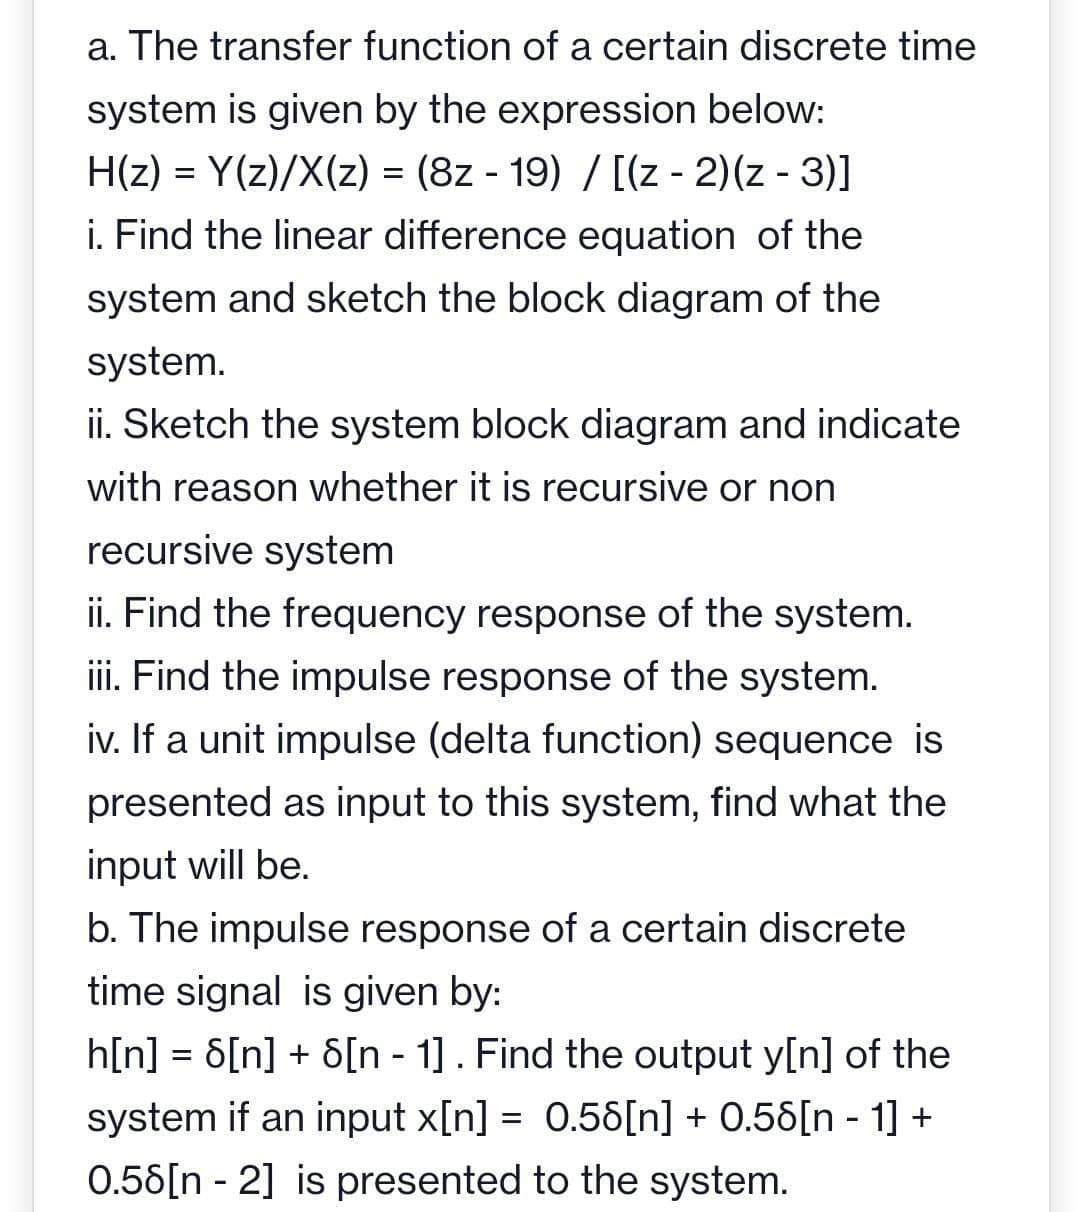 a. The transfer function of a certain discrete time
system is given by the expression below:
H(z) = Y(z)/X(z) = (8z - 19) / [(z-2)(z-3)]
i. Find the linear difference equation of the
system and sketch the block diagram of the
system.
ii. Sketch the system block diagram and indicate
with reason whether it is recursive or non
recursive system
ii. Find the frequency response of the system.
iii. Find the impulse response of the system.
iv. If a unit impulse (delta function) sequence is
presented as input to this system, find what the
input will be.
b. The impulse response of a certain discrete
time signal is given by:
h[n] = 6[n] + 8[n 1] . Find the output y[n] of the
system if an input x[n] = 0.58[n] + 0.58[n 1] +
0.58[n-2] is presented to the system.
-